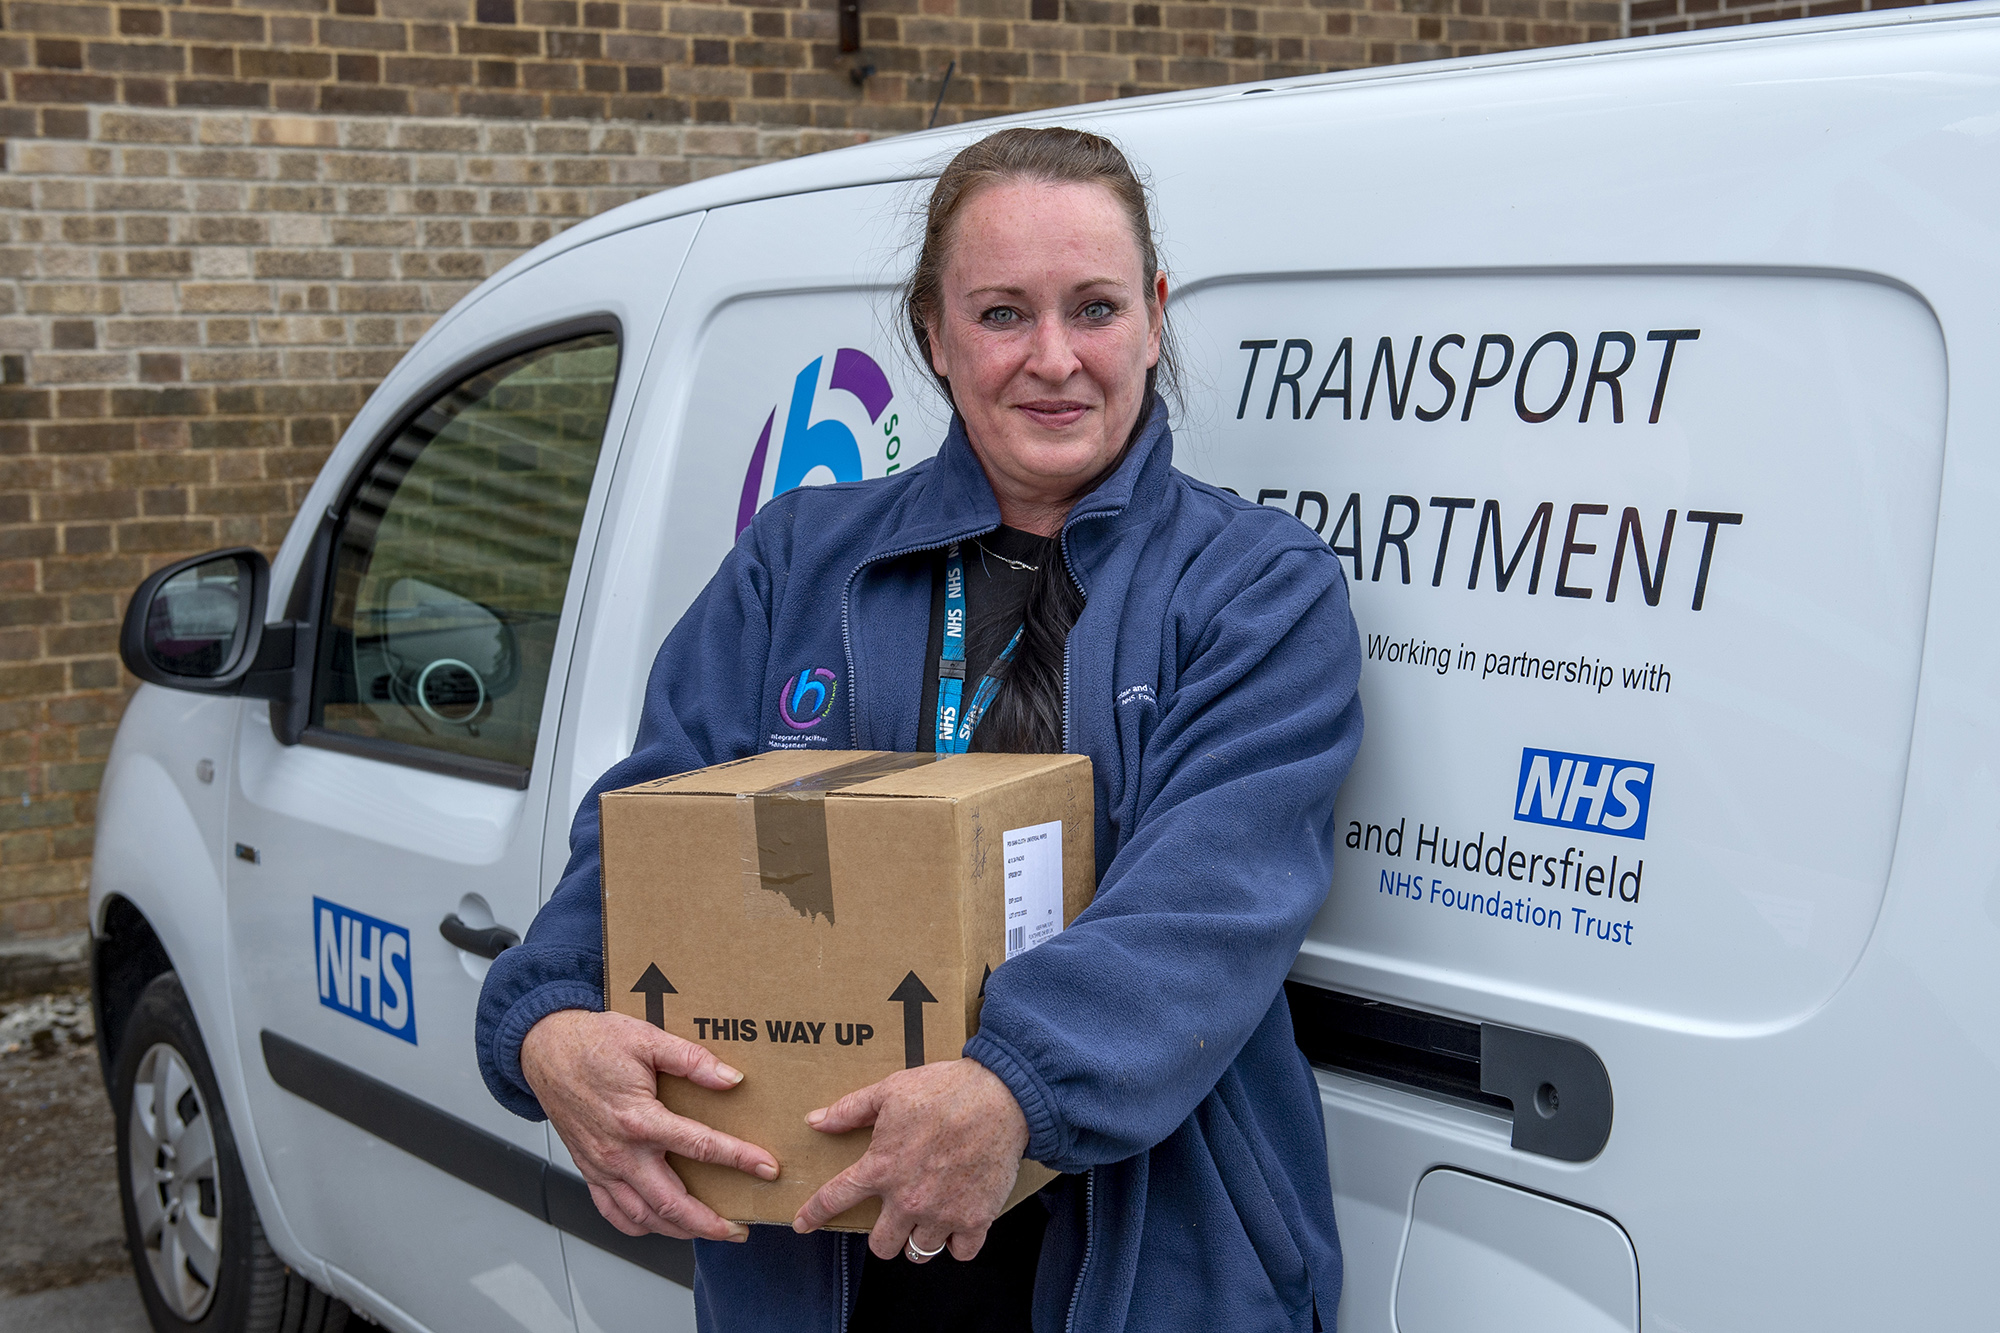 Female staff member stood next to one of our vans holding a cardboard box.